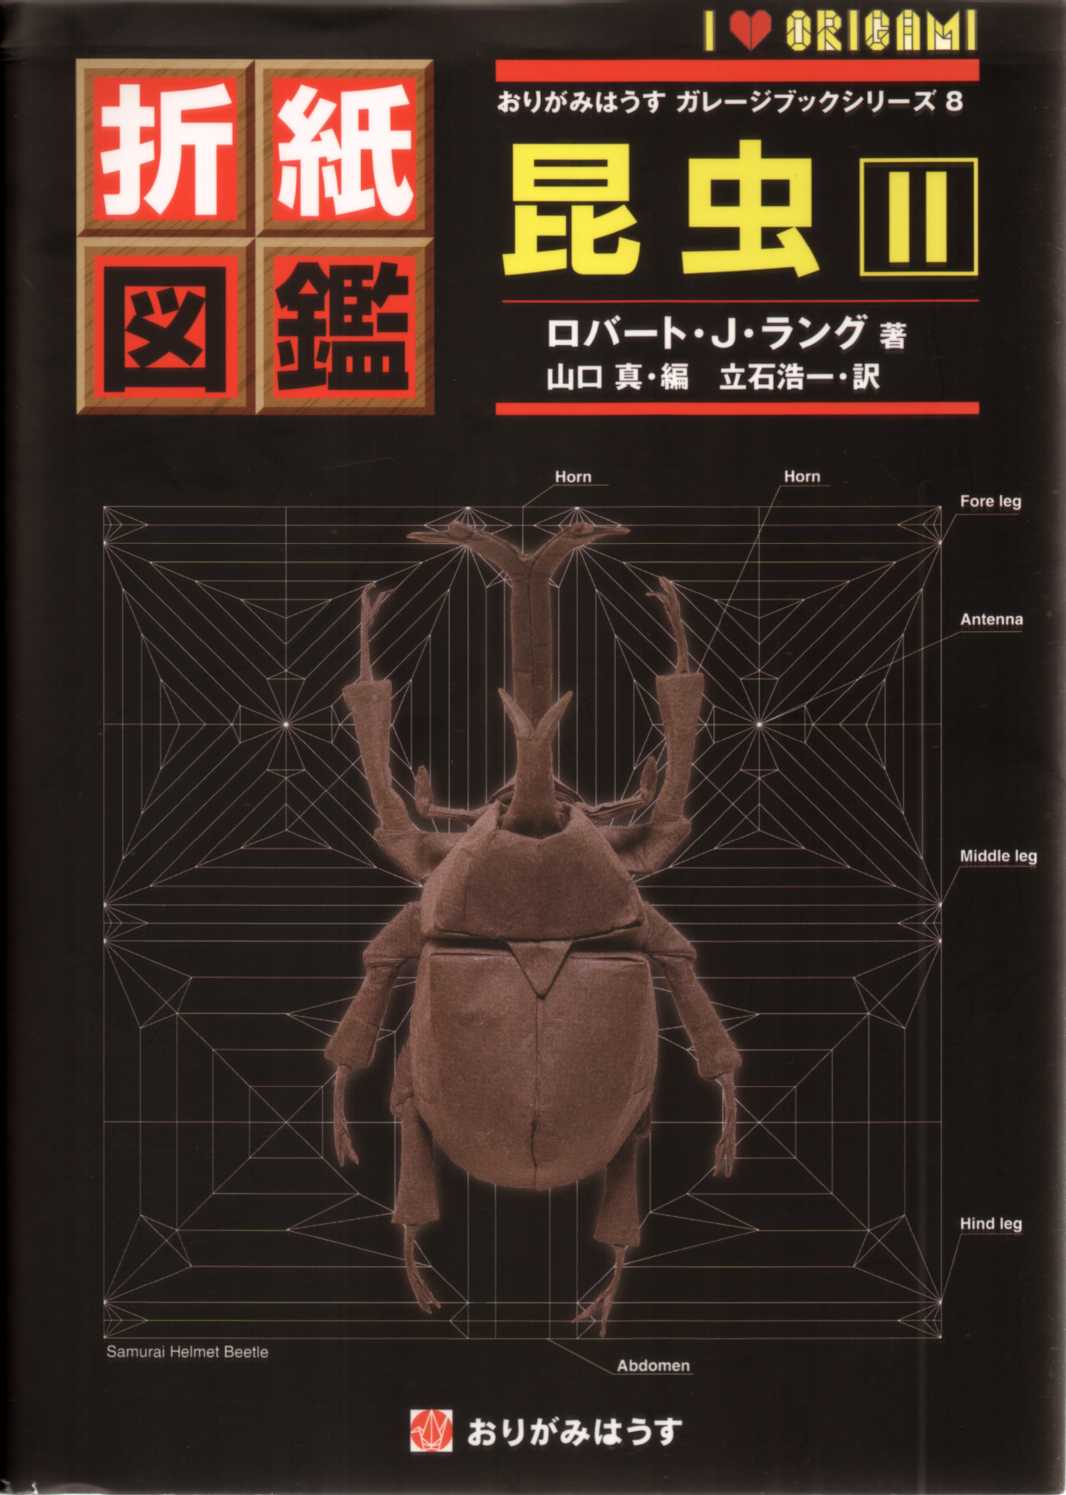 Origami Insects II / 折紙図鑑　昆虫・2 : page 17.